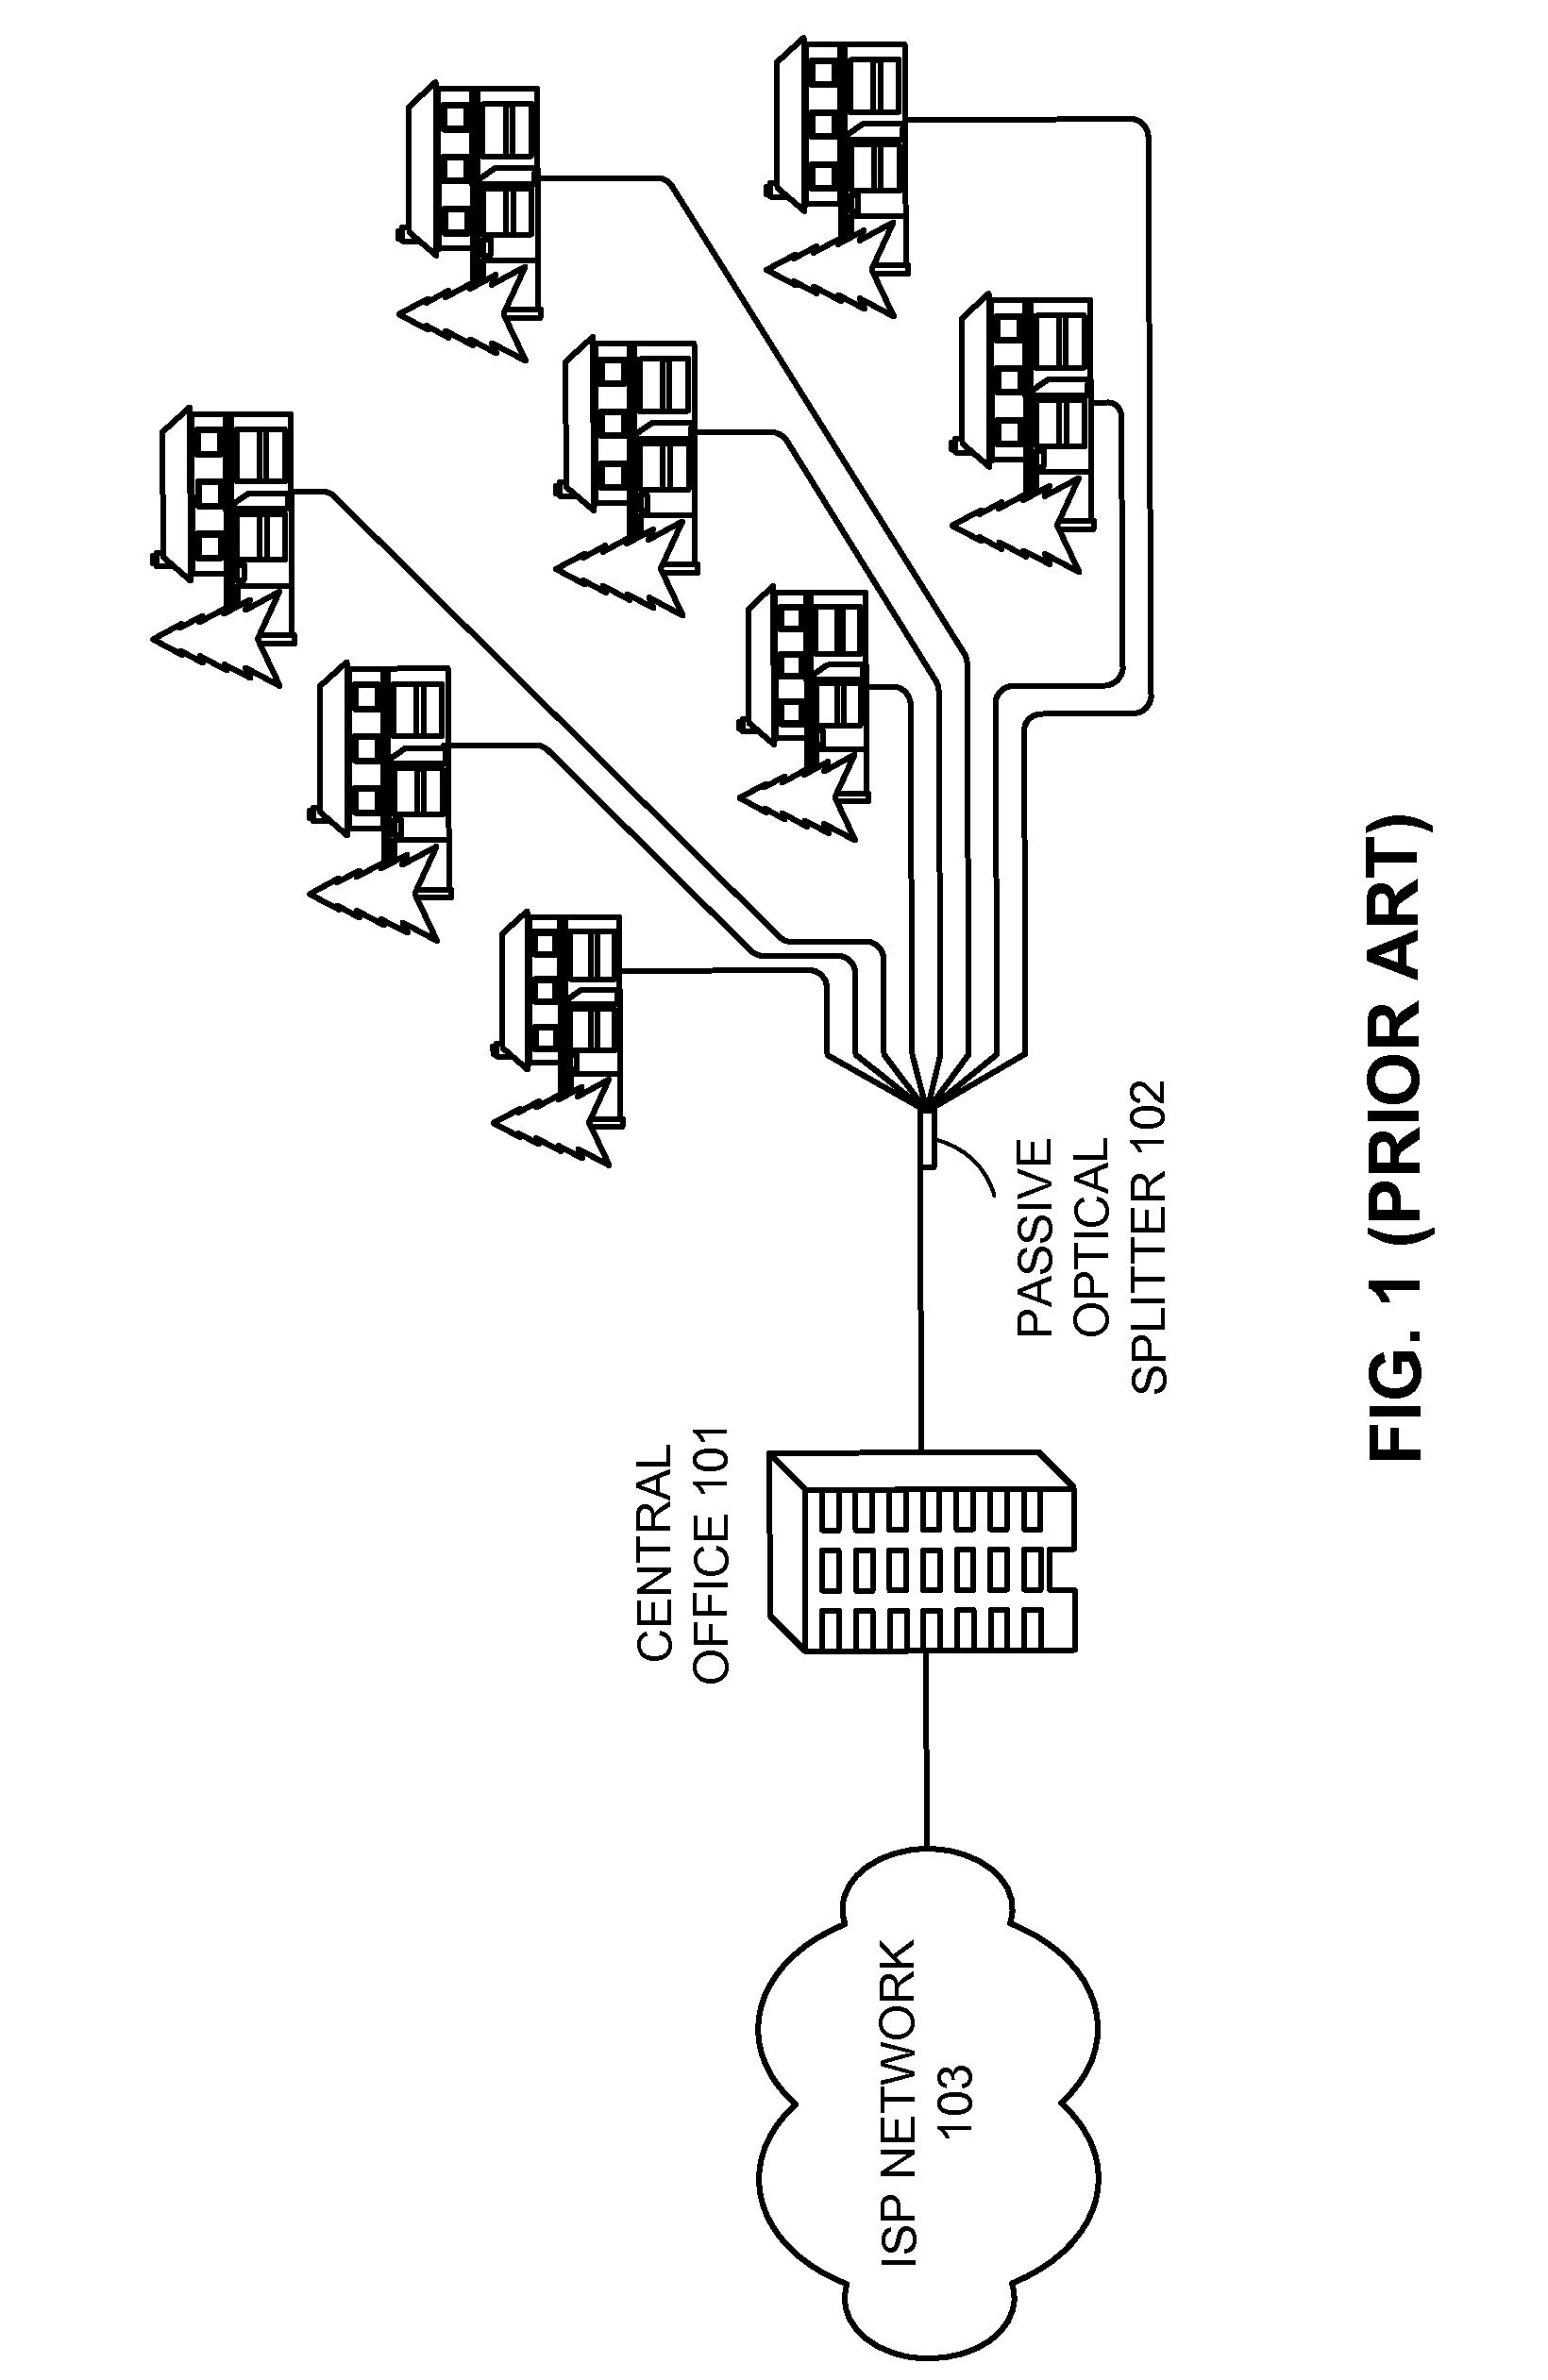 Method and system for protection switching in ethernet passive optical networks